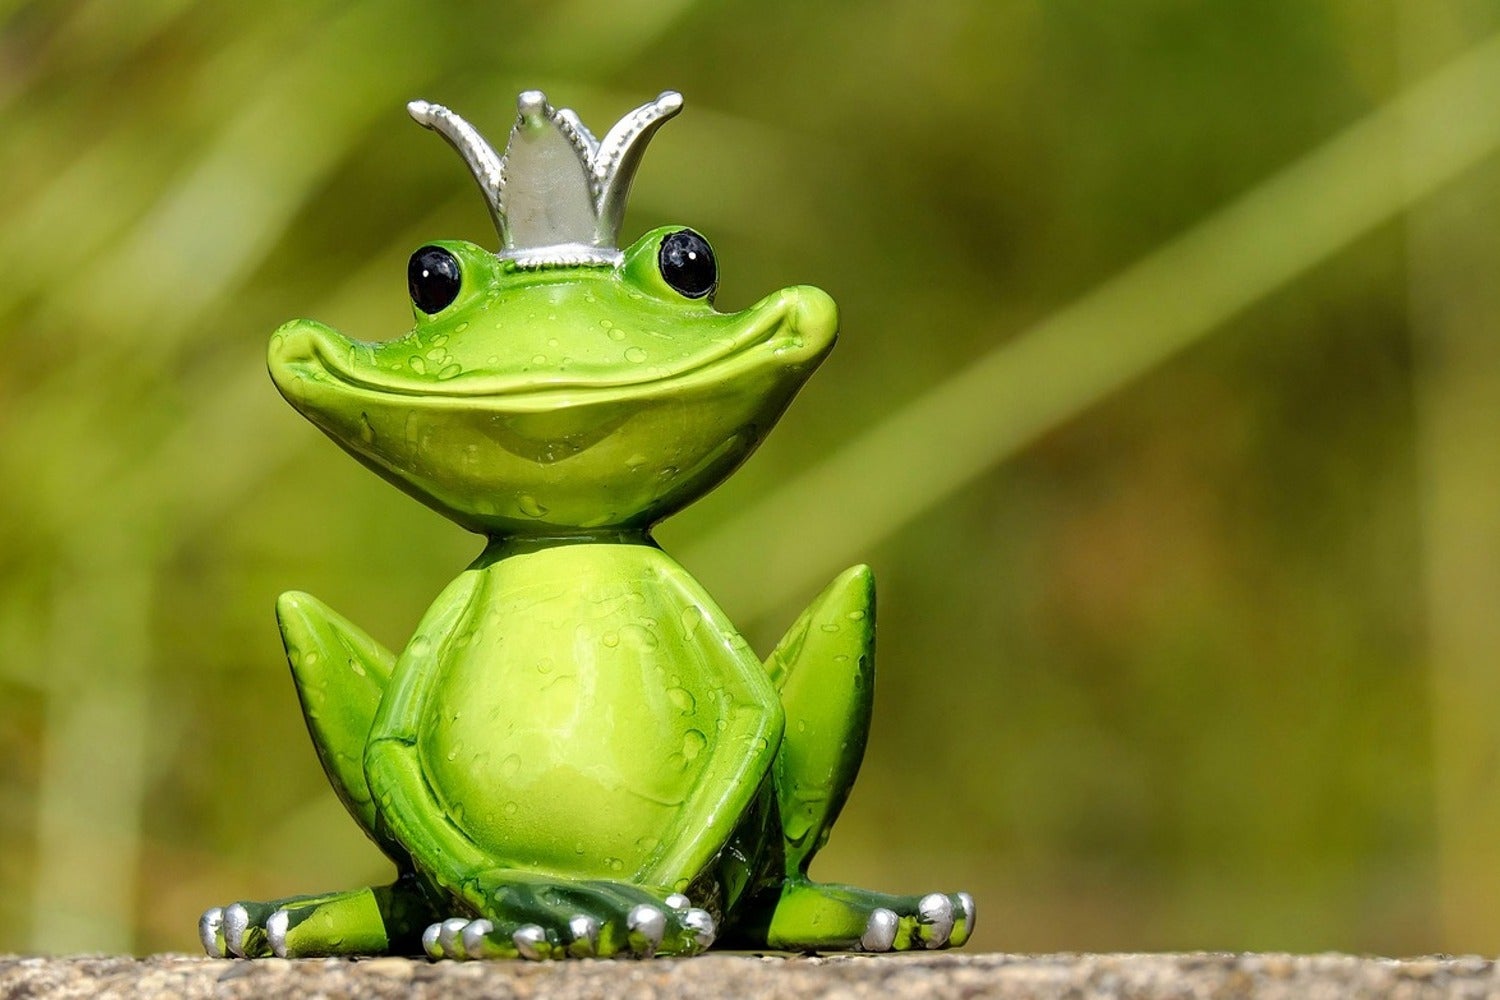 Wall Mural Photo Wallpaper Mr. Frog King | Shop now!